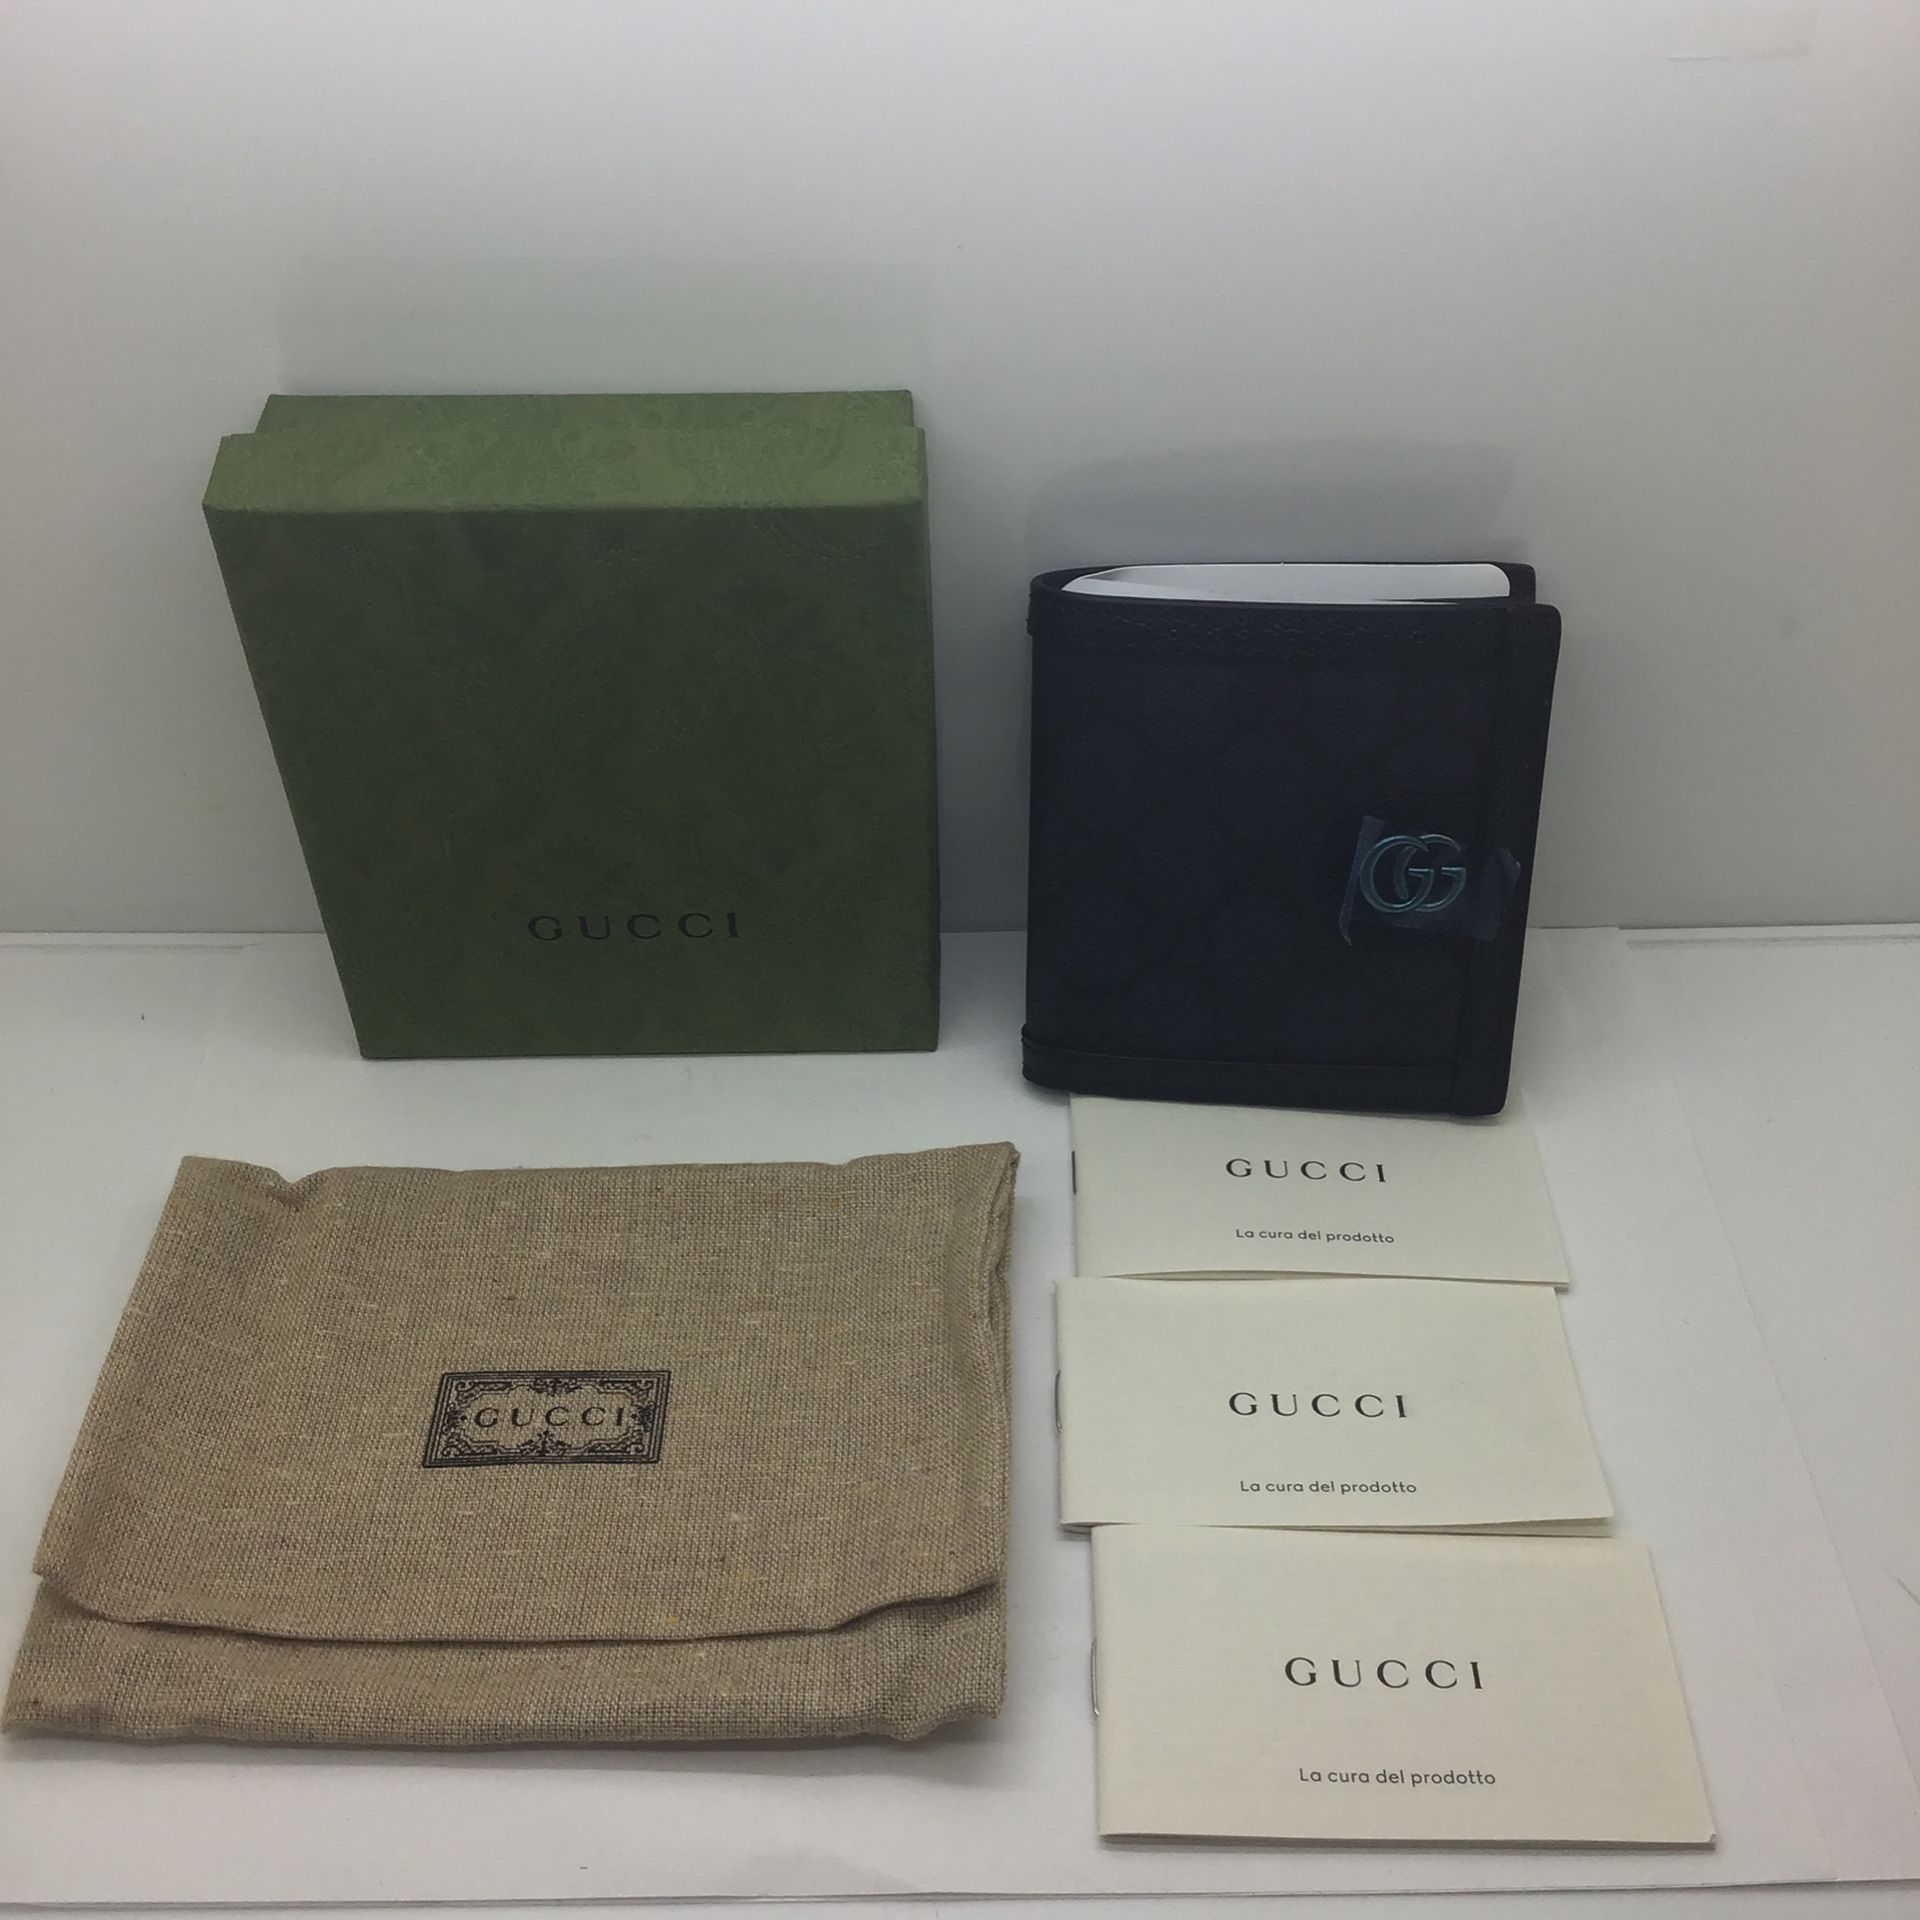 BRAND NEW Gucci Ophidia Bi Fold Wallet Blue GG Supreme Leather Authentic 